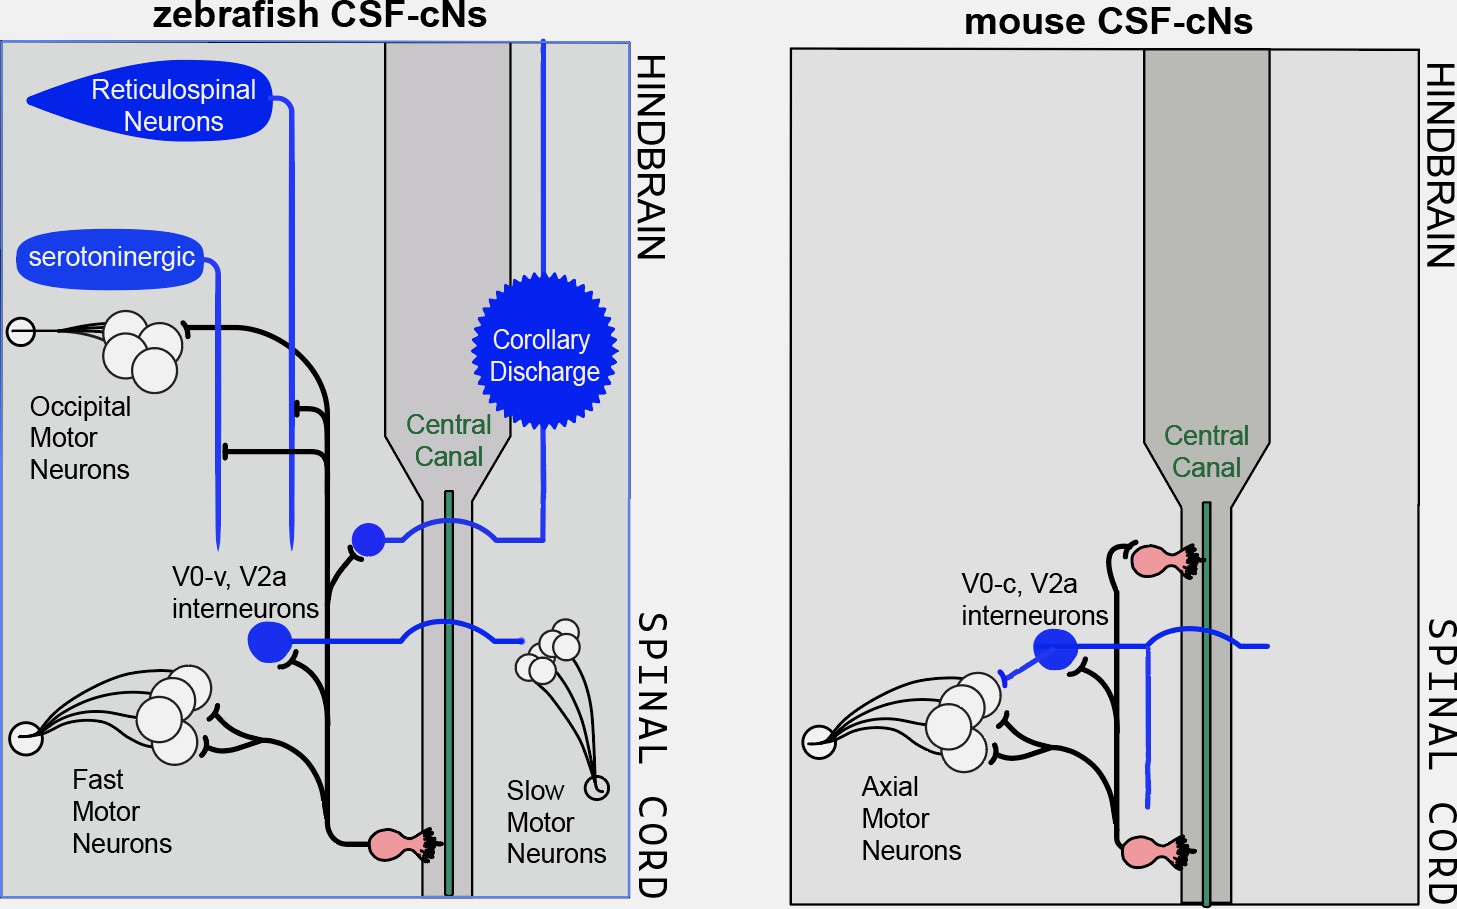 Locomotion: Unraveling the roles of cerebrospinal fluid-contacting